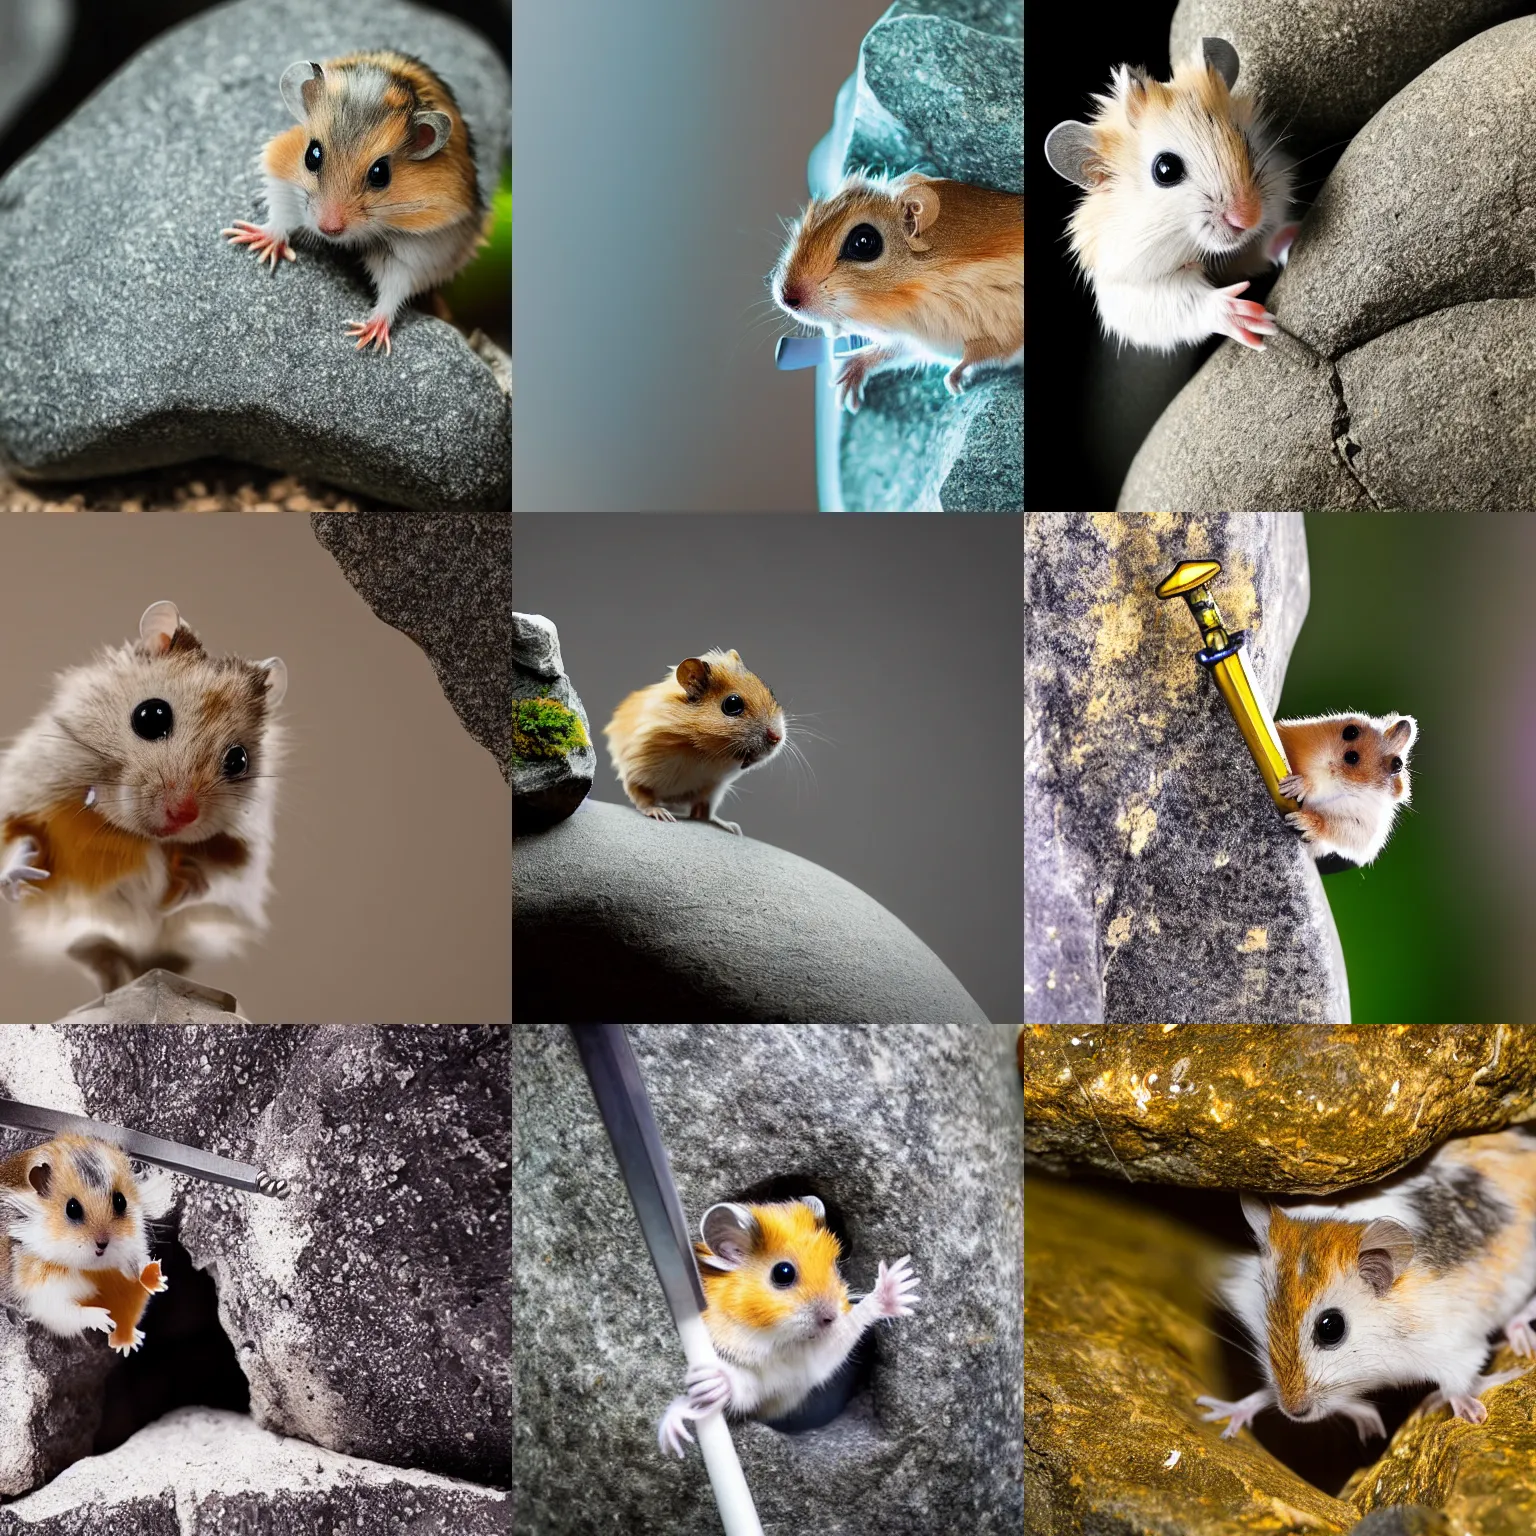 Prompt: A highly detailed photograph of a roborovski hamster, climbing up a massive sword stuck in a stone